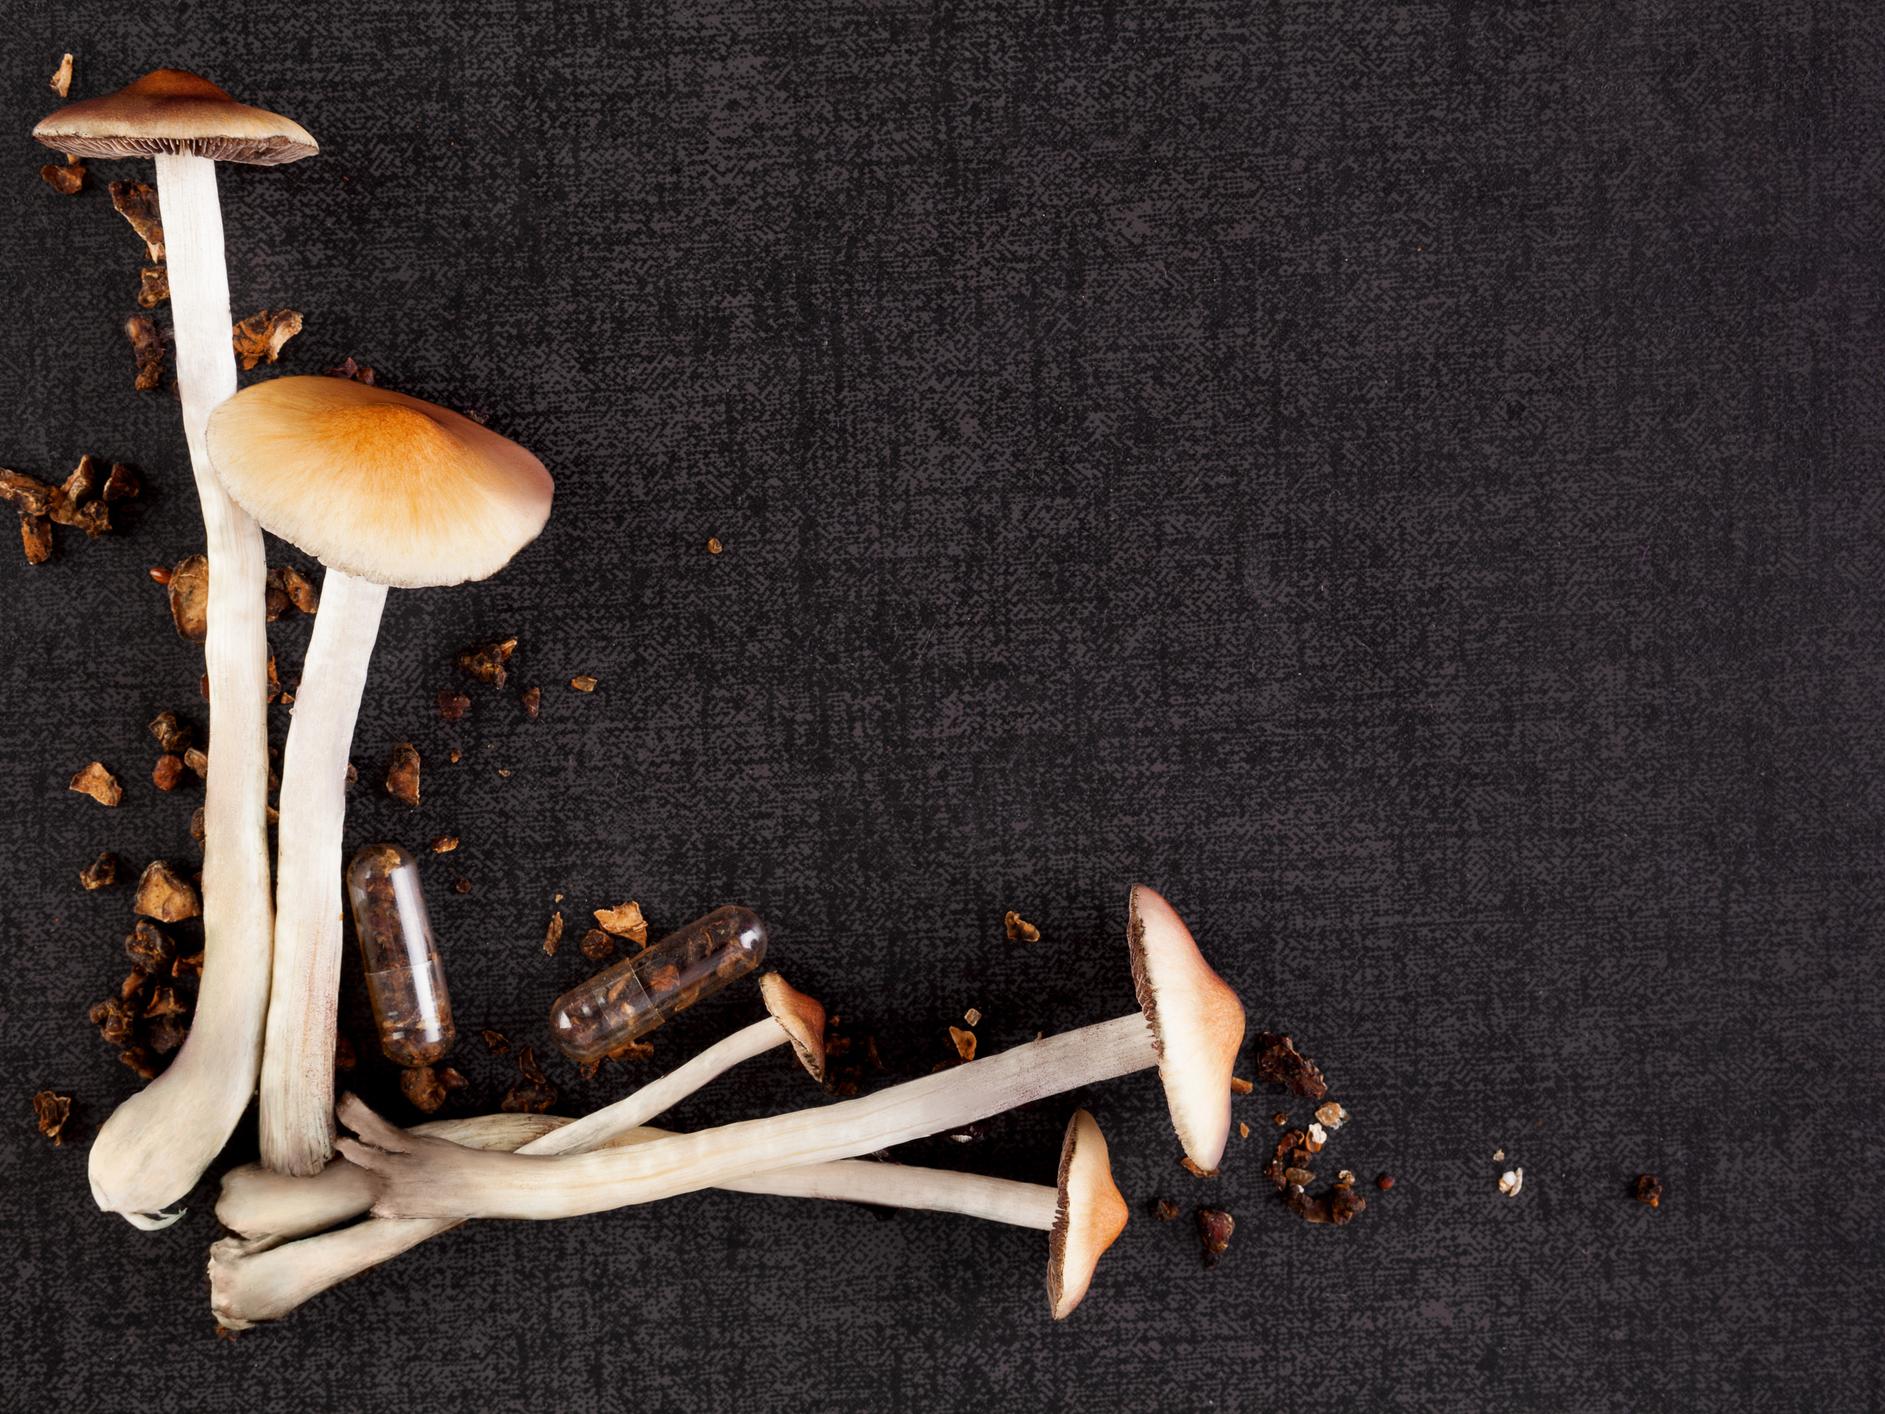 Magic mushrooms may have evolved their psychedelic properties as a defence mechanism